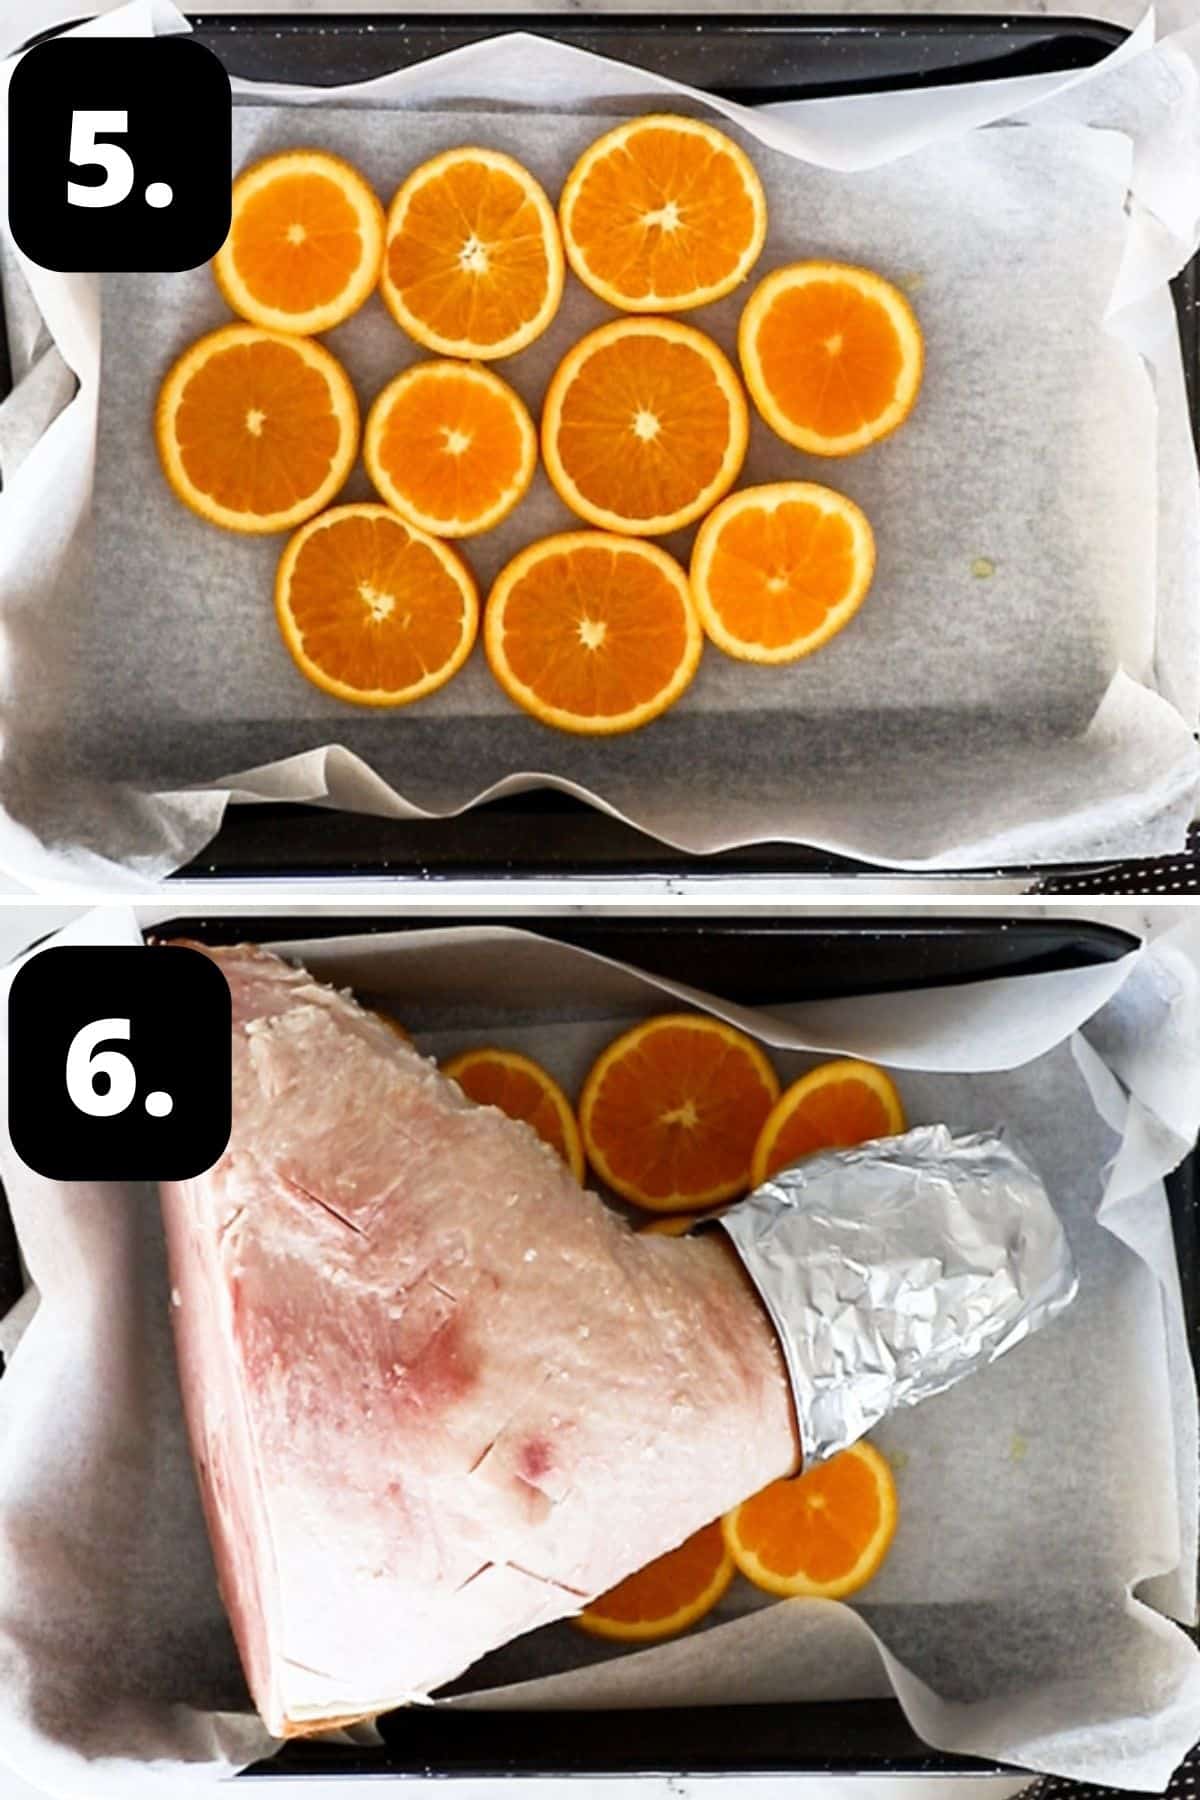 Steps 5-6 of preparing this recipe - the orange slices in the baking tray and the ham sitting on top of the orange.